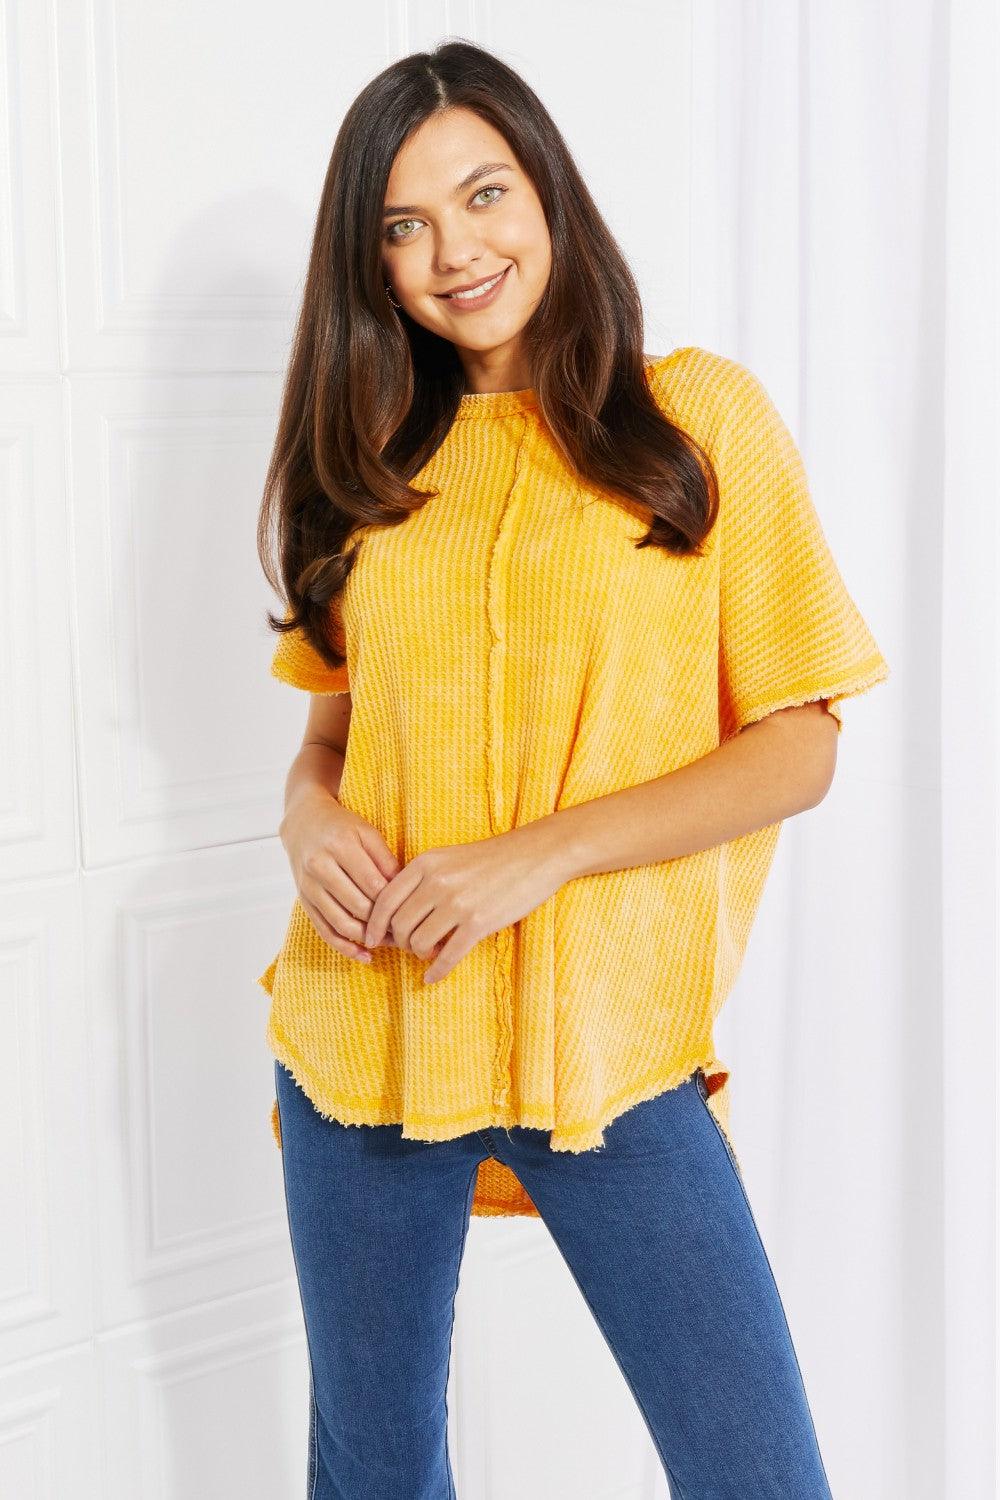 Start Small Washed Waffle Knit Top in Yellow Gold - Studio 653